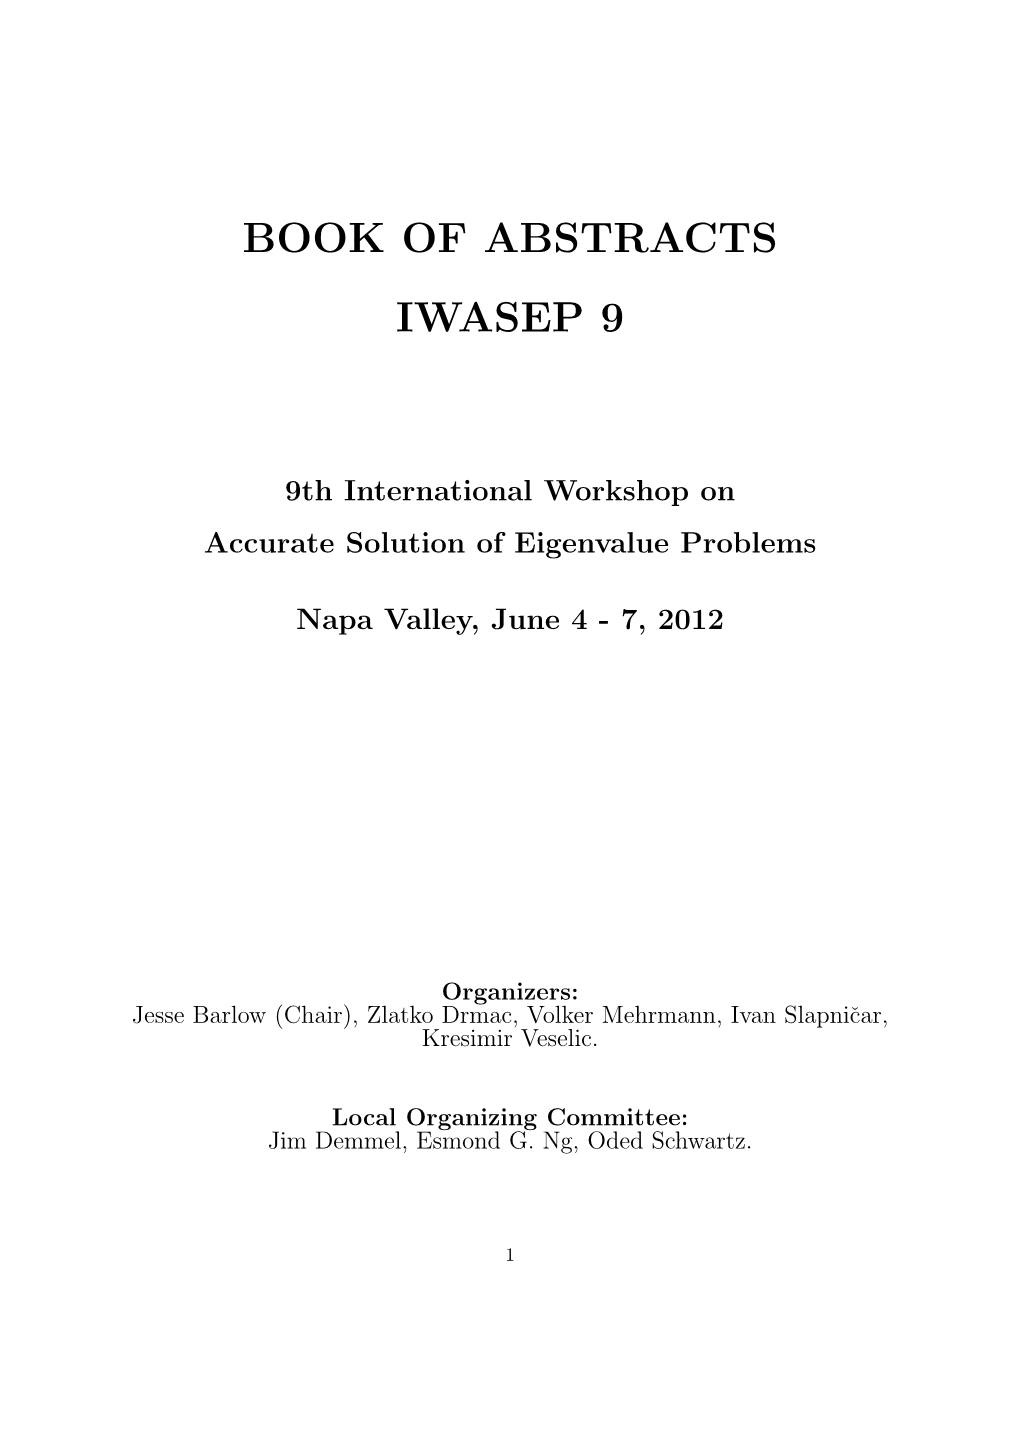 Book of Abstracts Iwasep 9